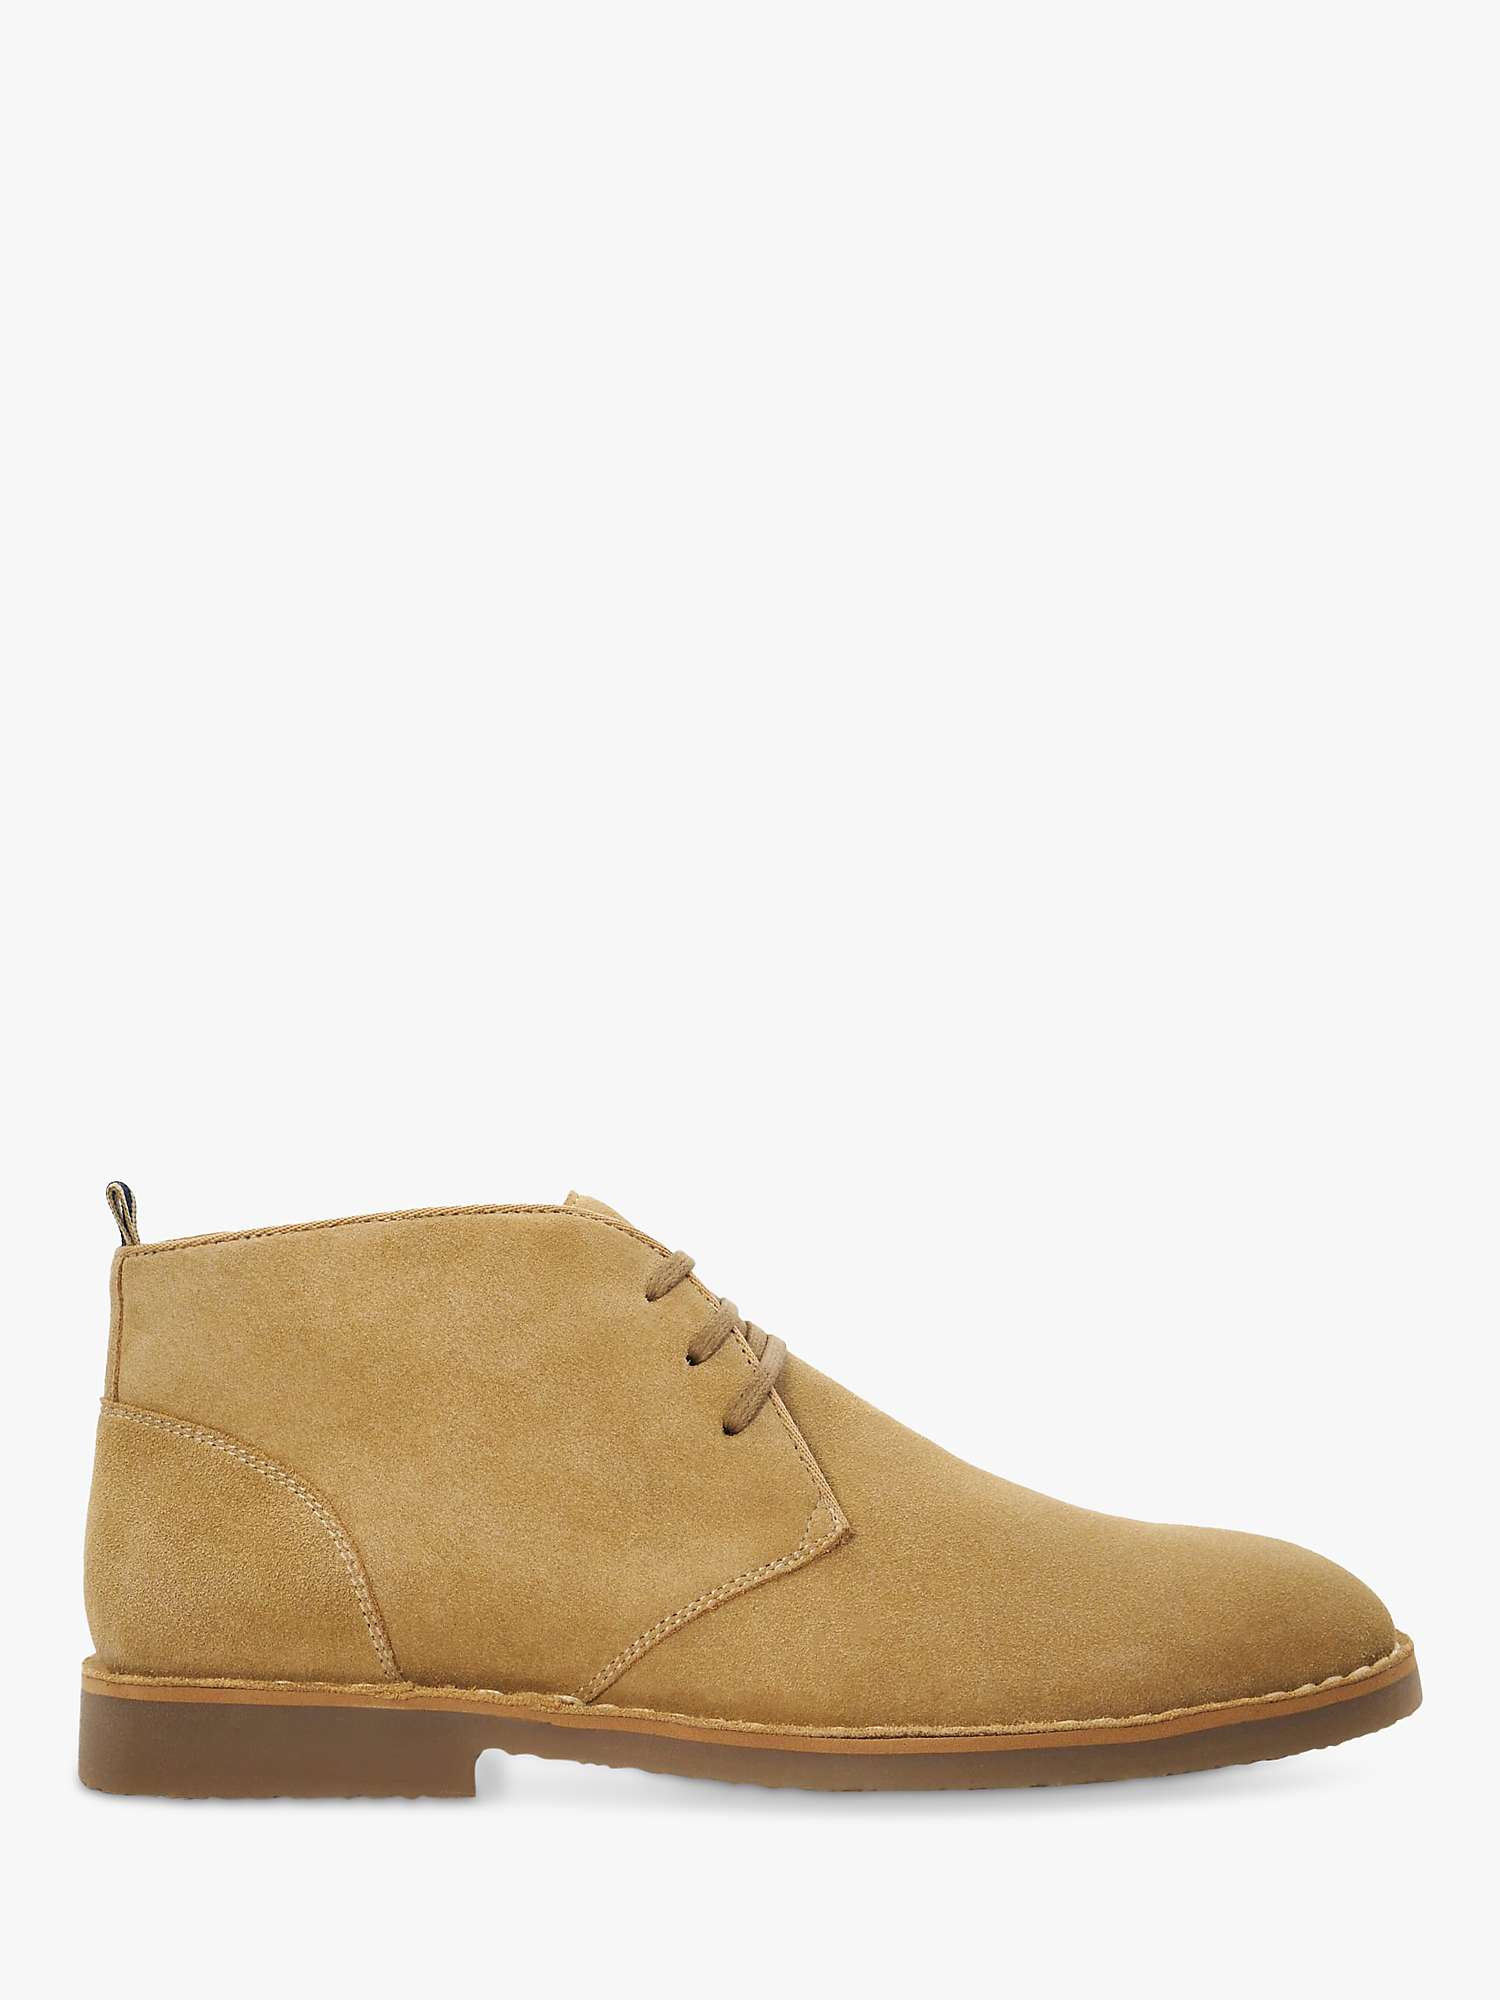 Buy Dune Cashed Suede Lace Up Chukka Boots, Beige Online at johnlewis.com